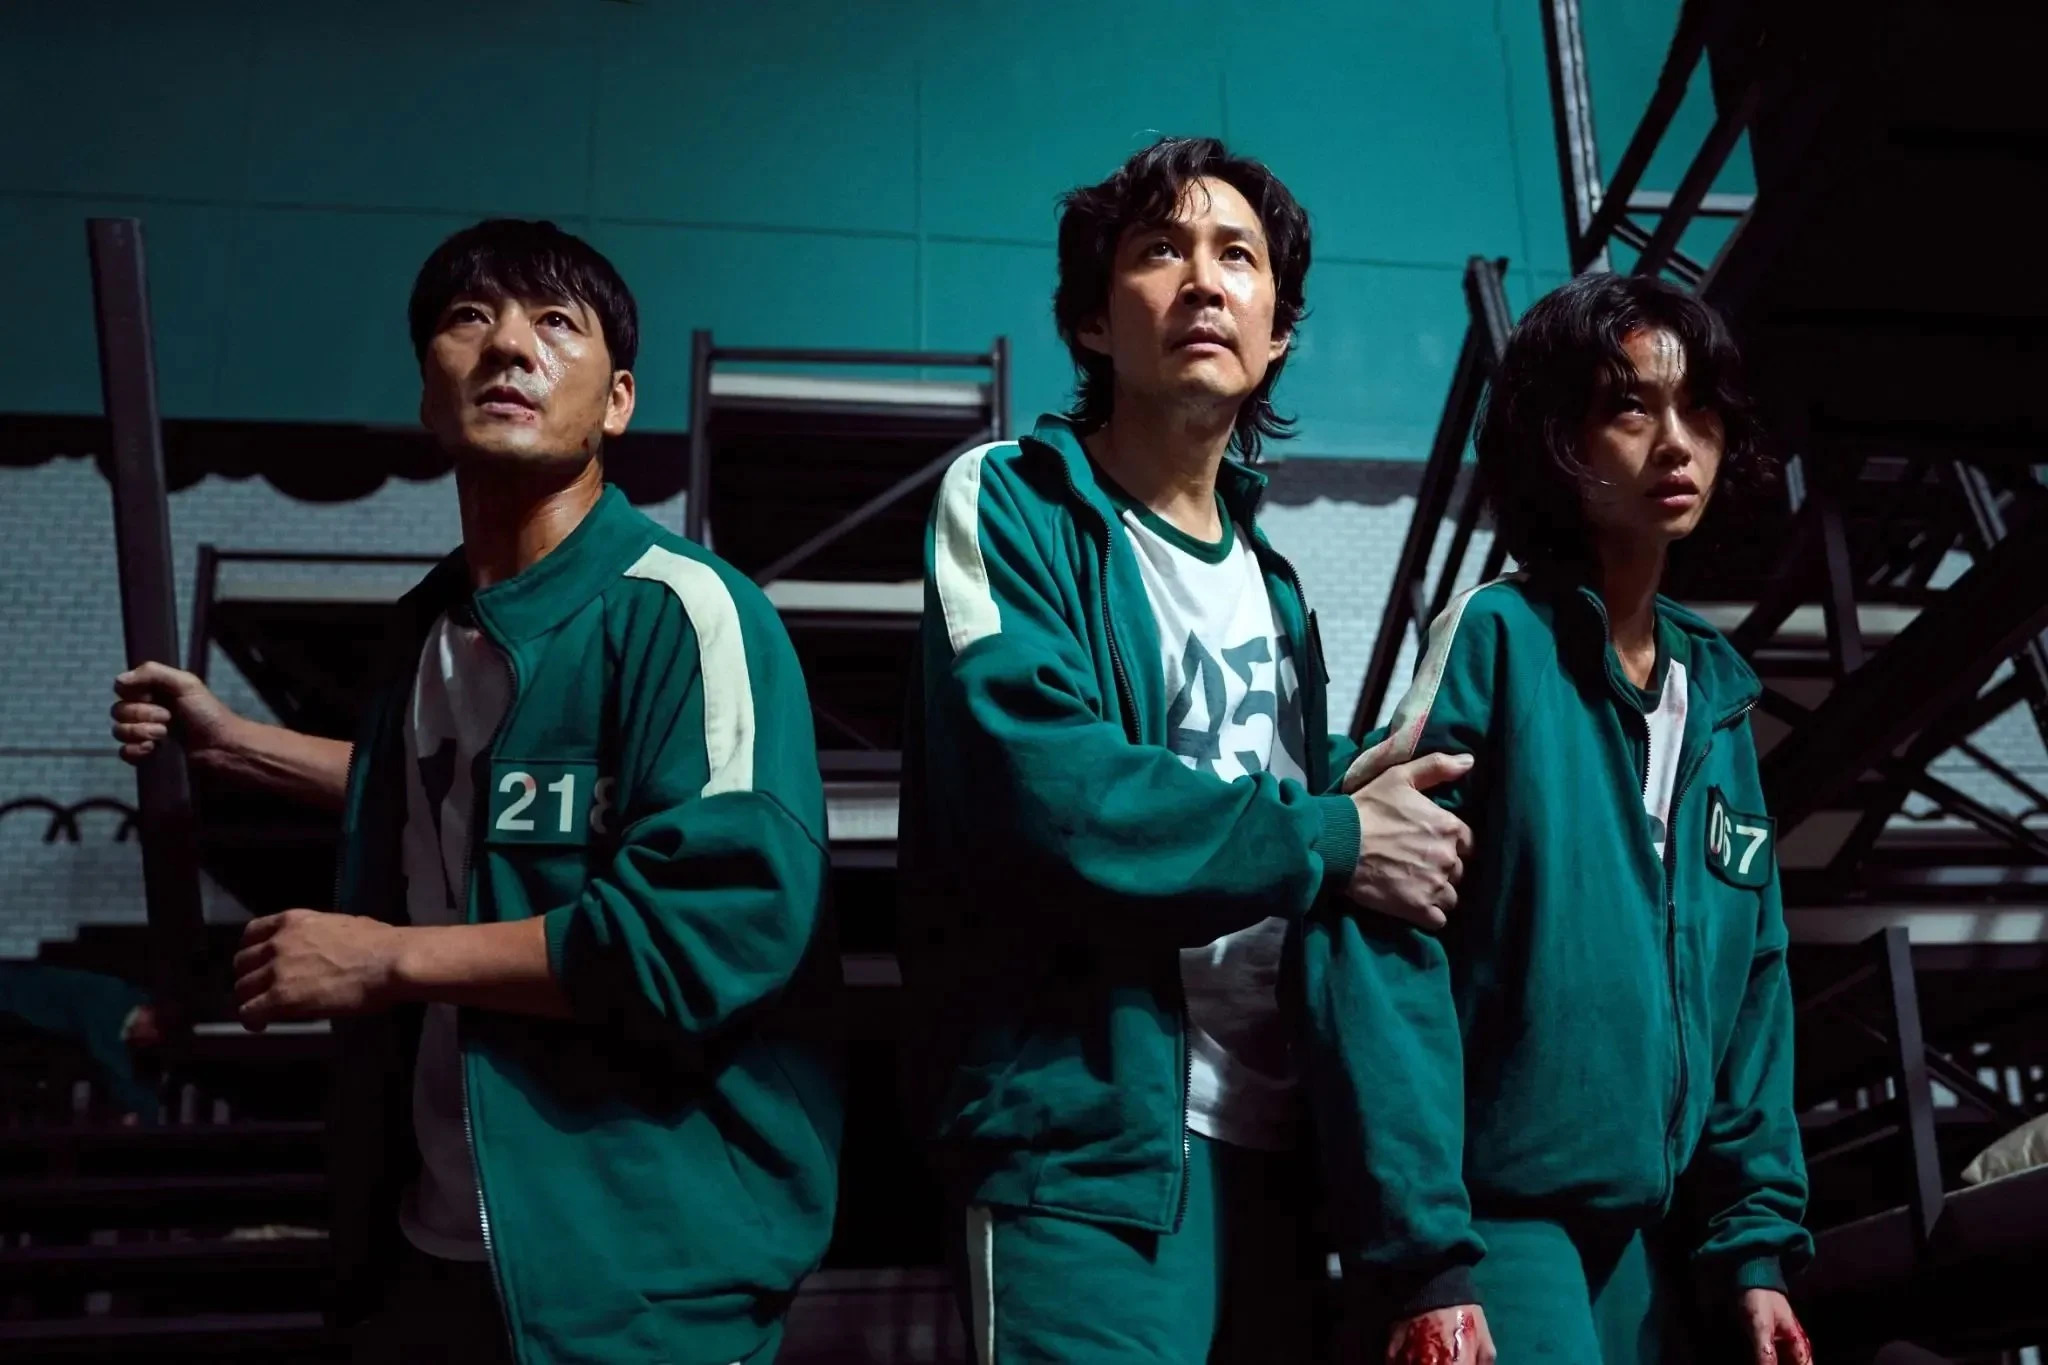 Characters Cho Sang-Woo, Seong Gi-Hun and Abdul Ali in 'Squid Game' wearing green tracksuits holding weapons